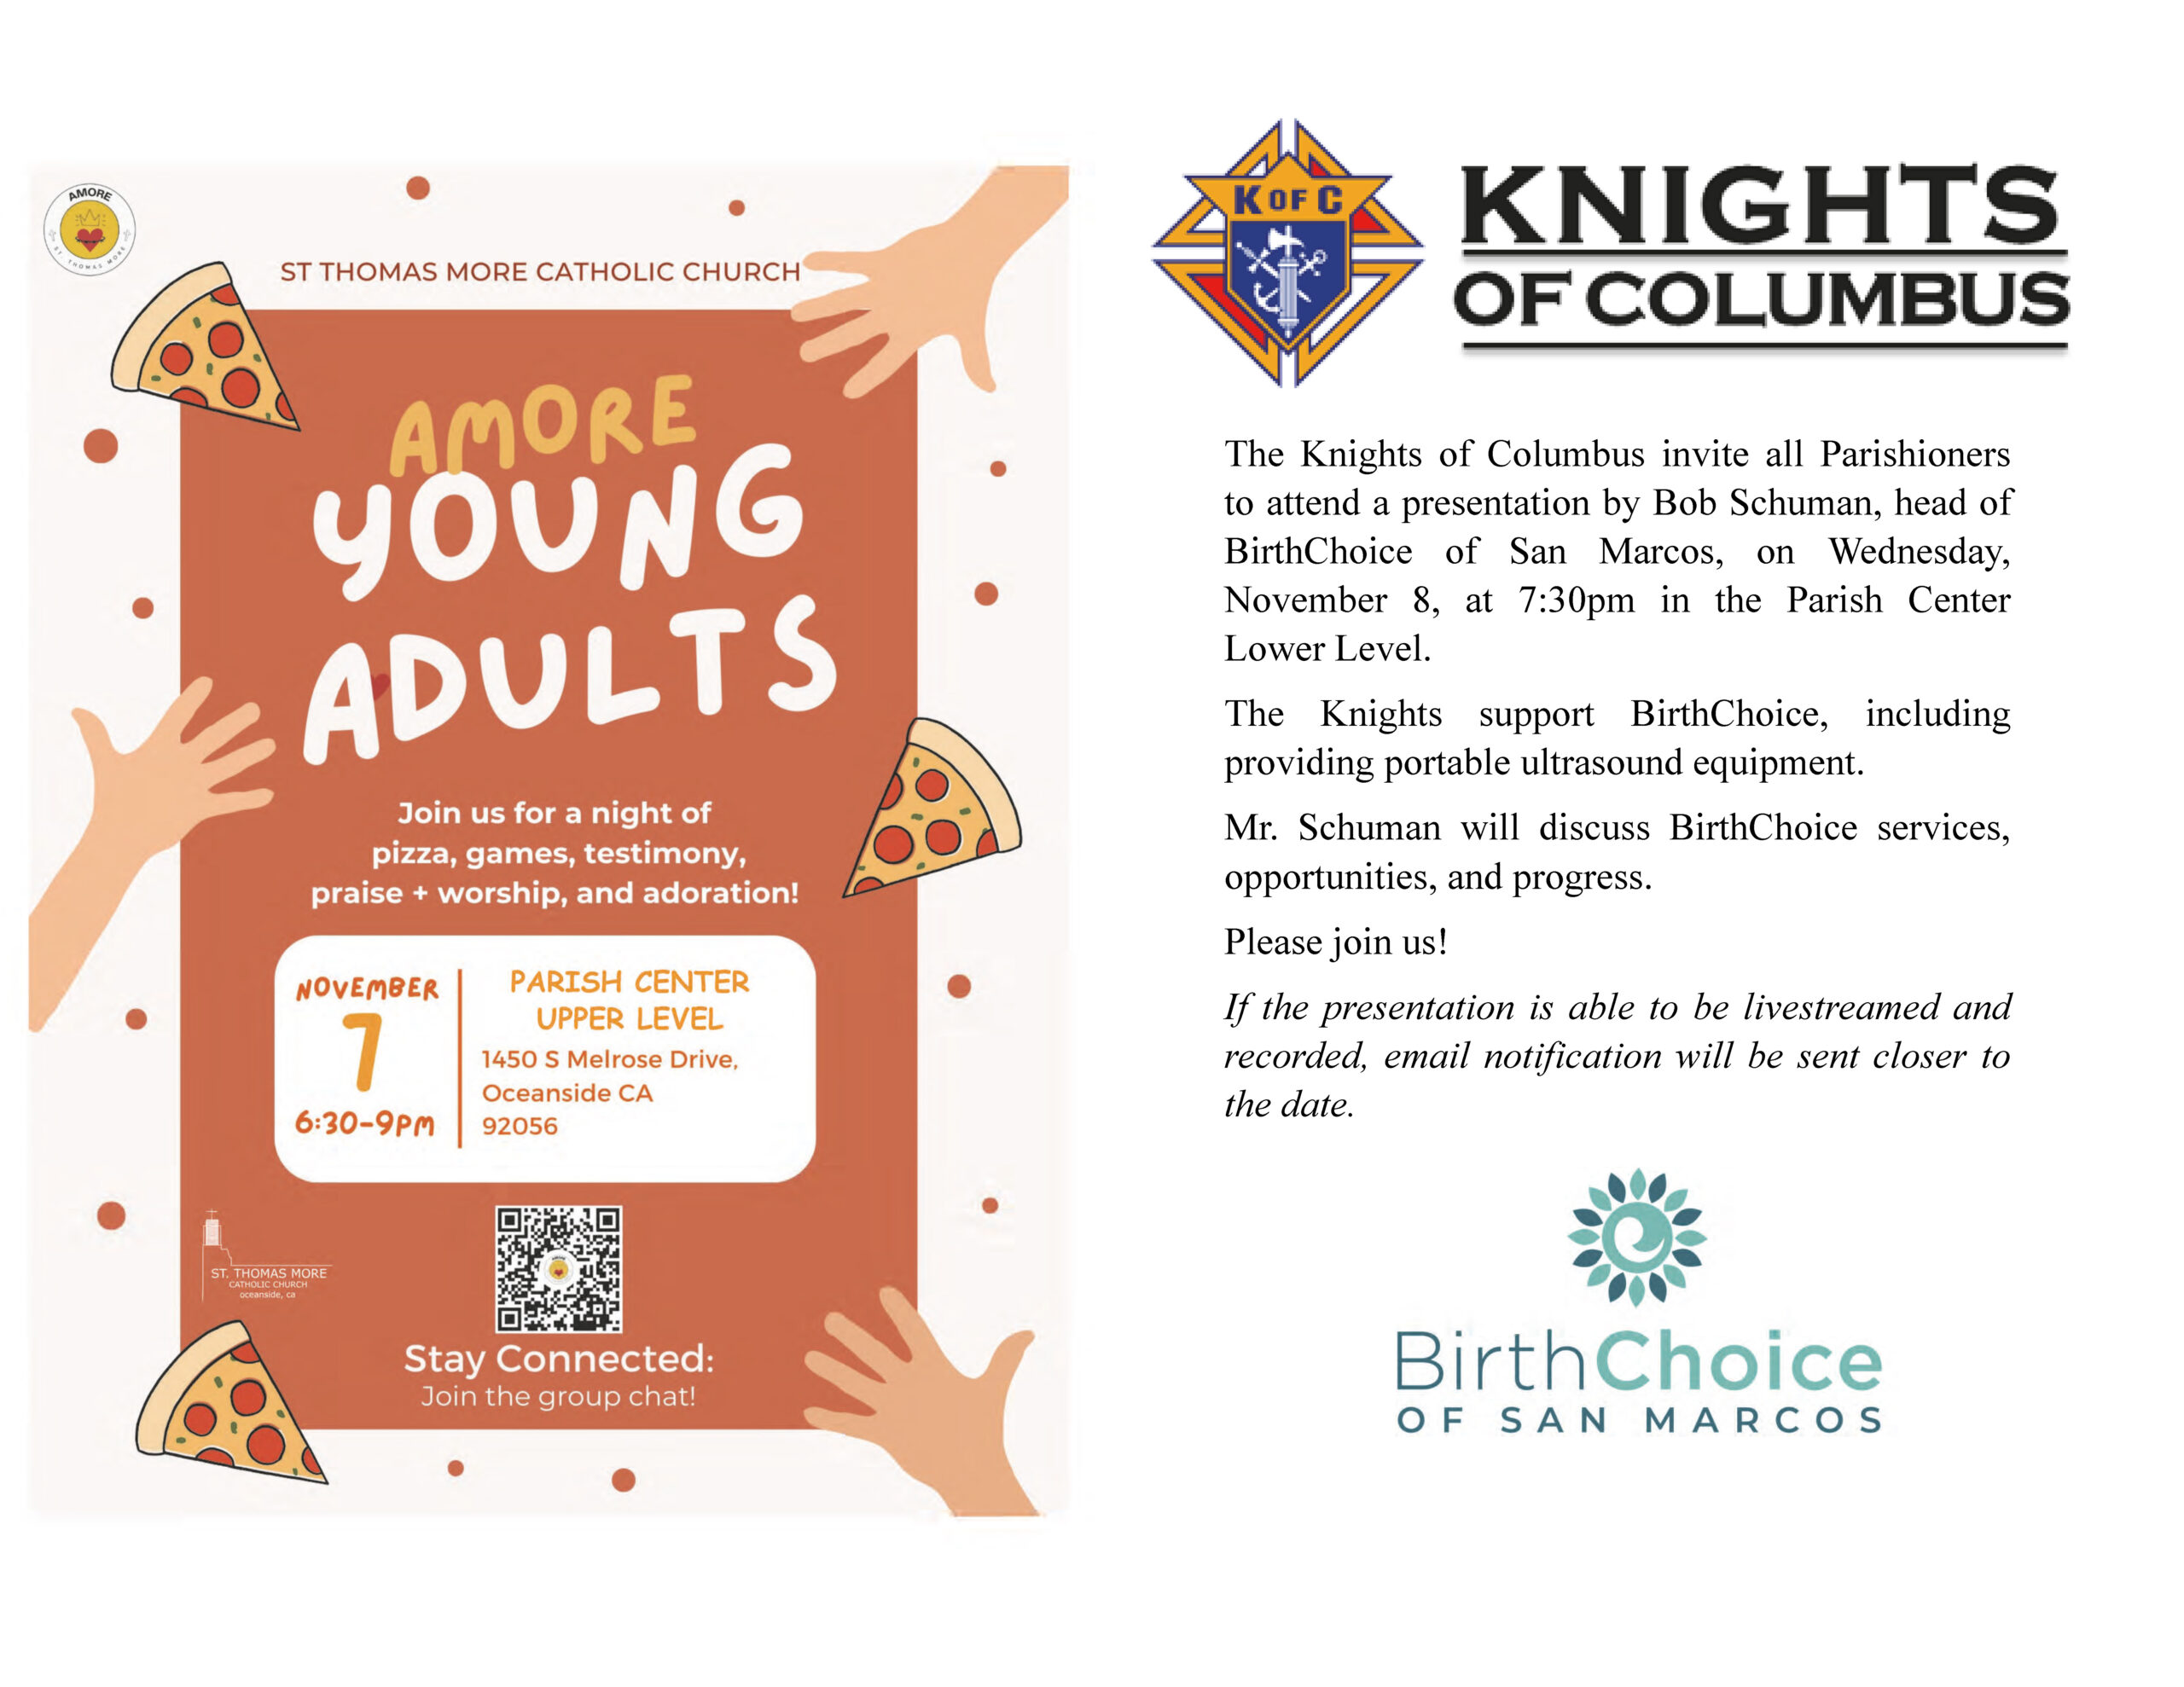 Amore Young Adult Meeting, Tue, Nov 7; Knights of Columbus Presentation, Wed, Nov 8